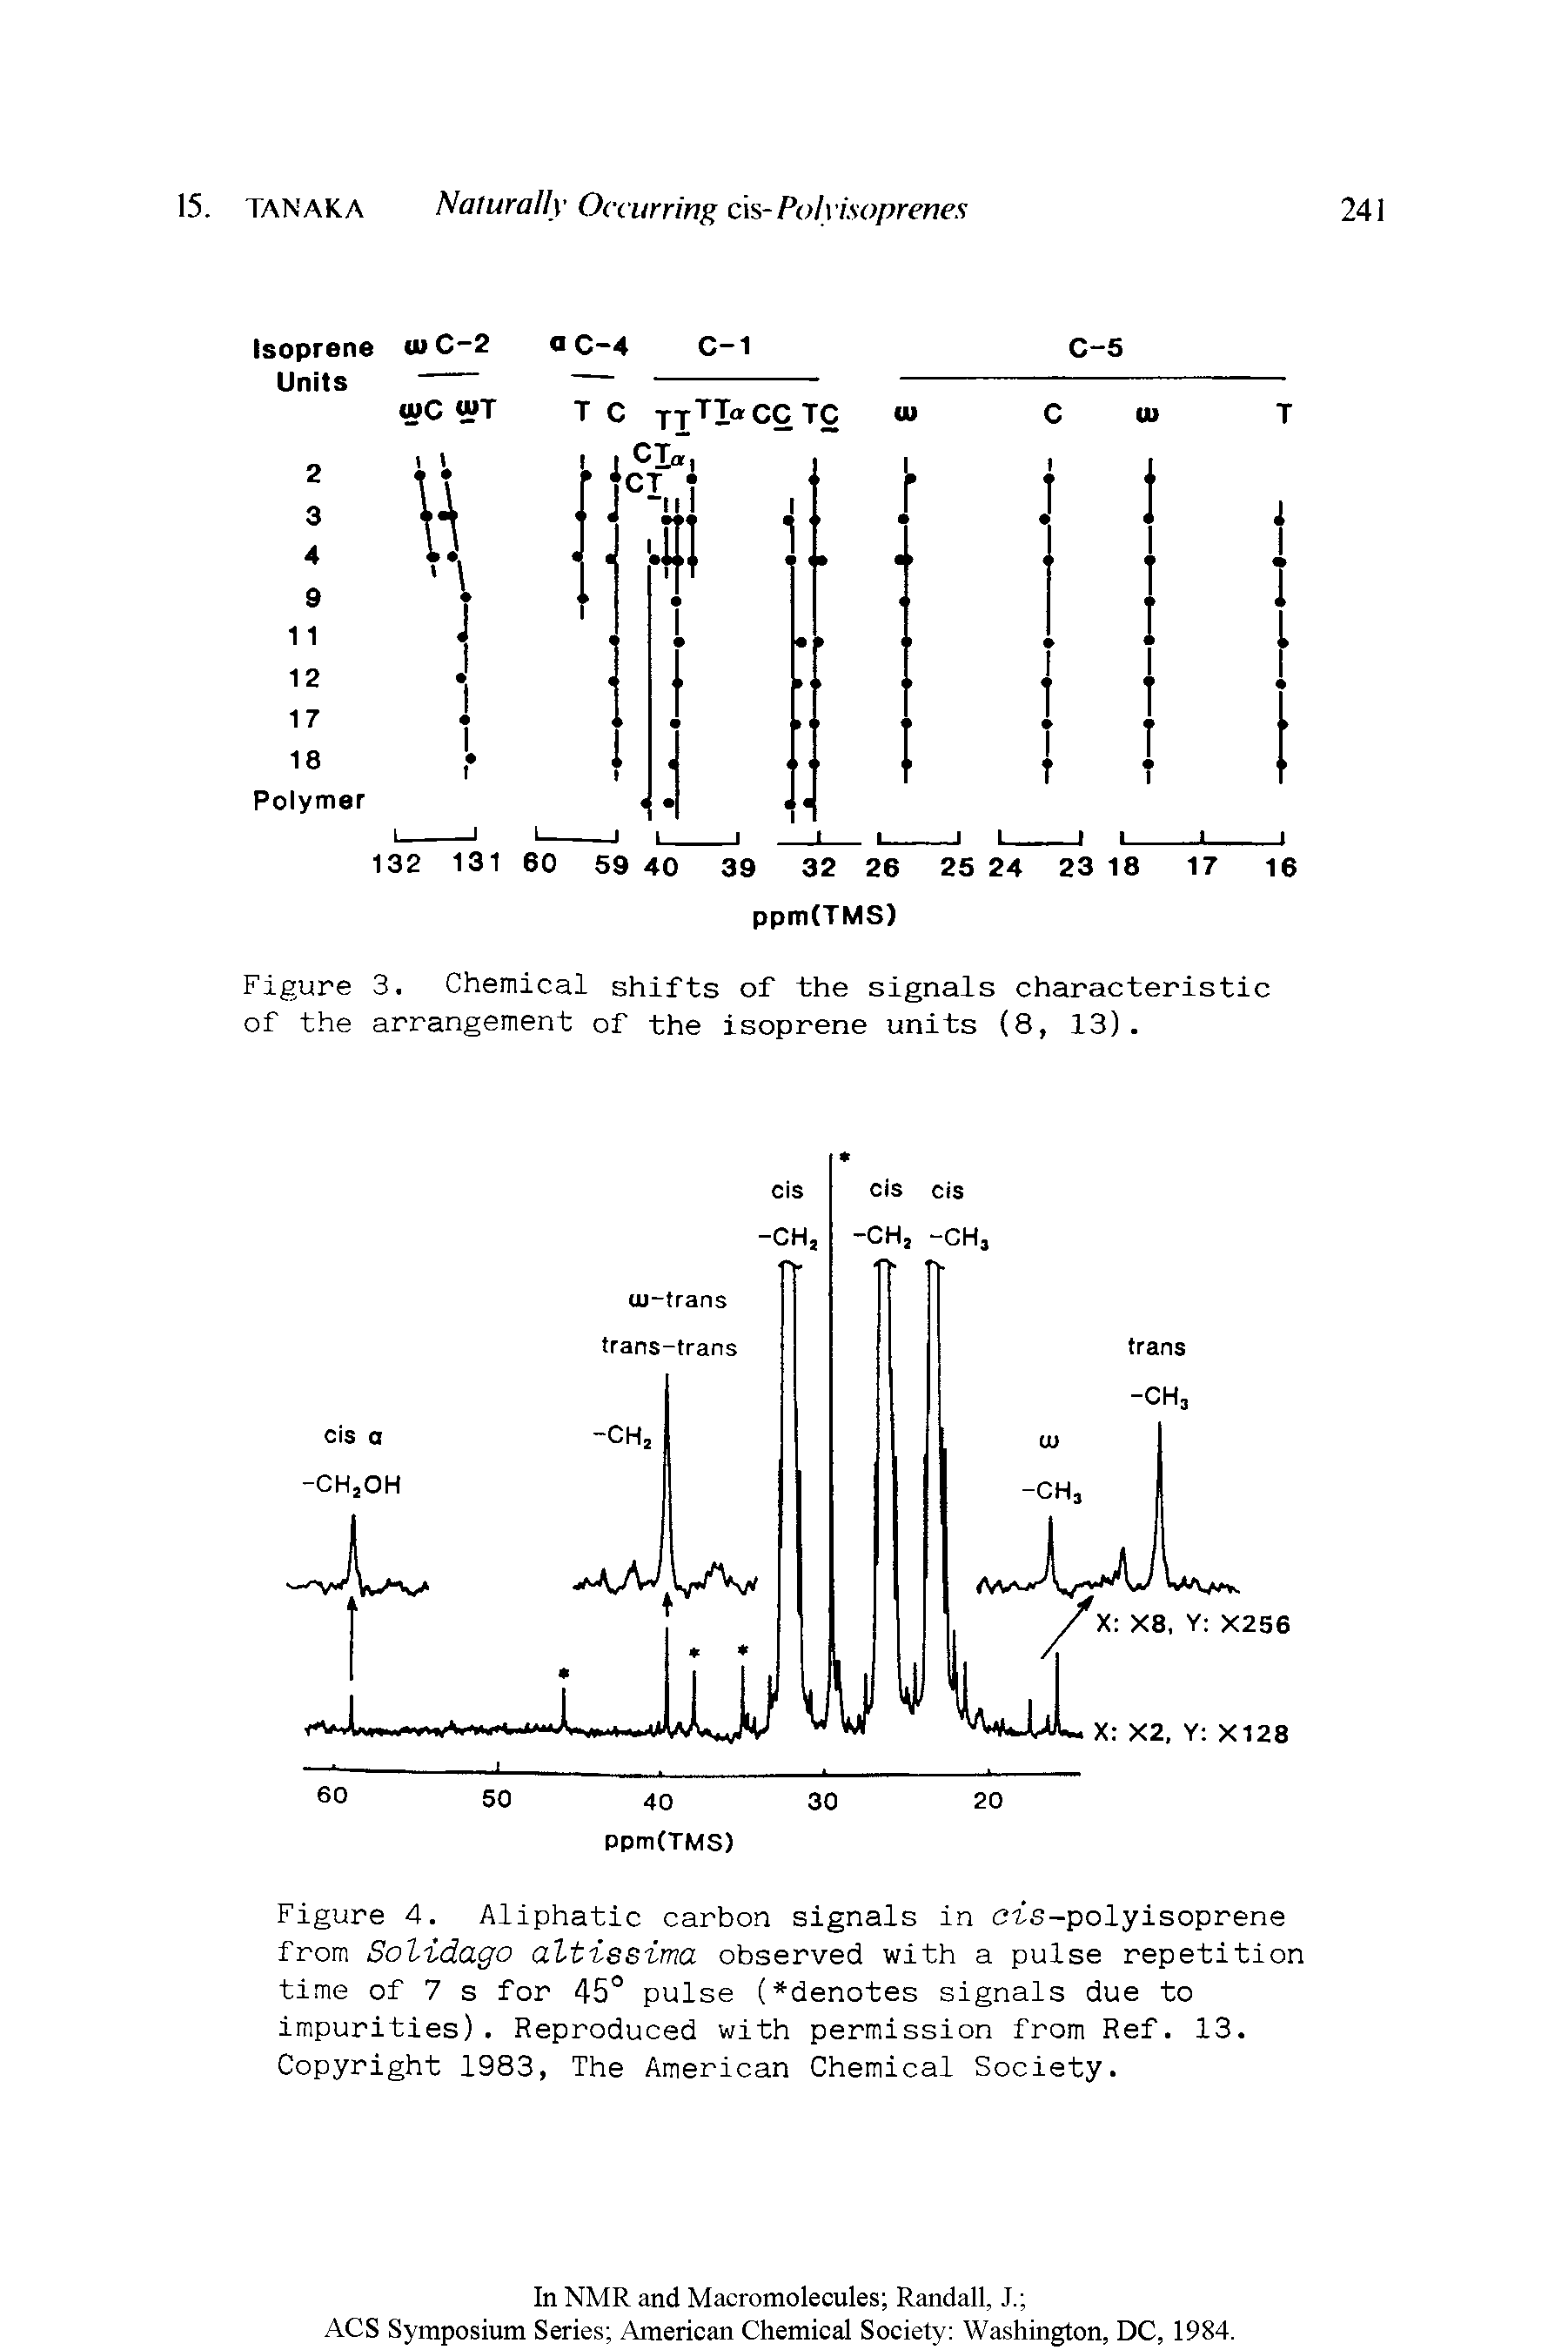 Figure 4. Aliphatic carbon signals in cis-polyisoprene from Solidago altissima observed with a pulse repetition time of 7 s for 45° pulse ( denotes signals due to impurities). Reproduced with permission from Ref. 13. Copyright 1983, The American Chemical Society.